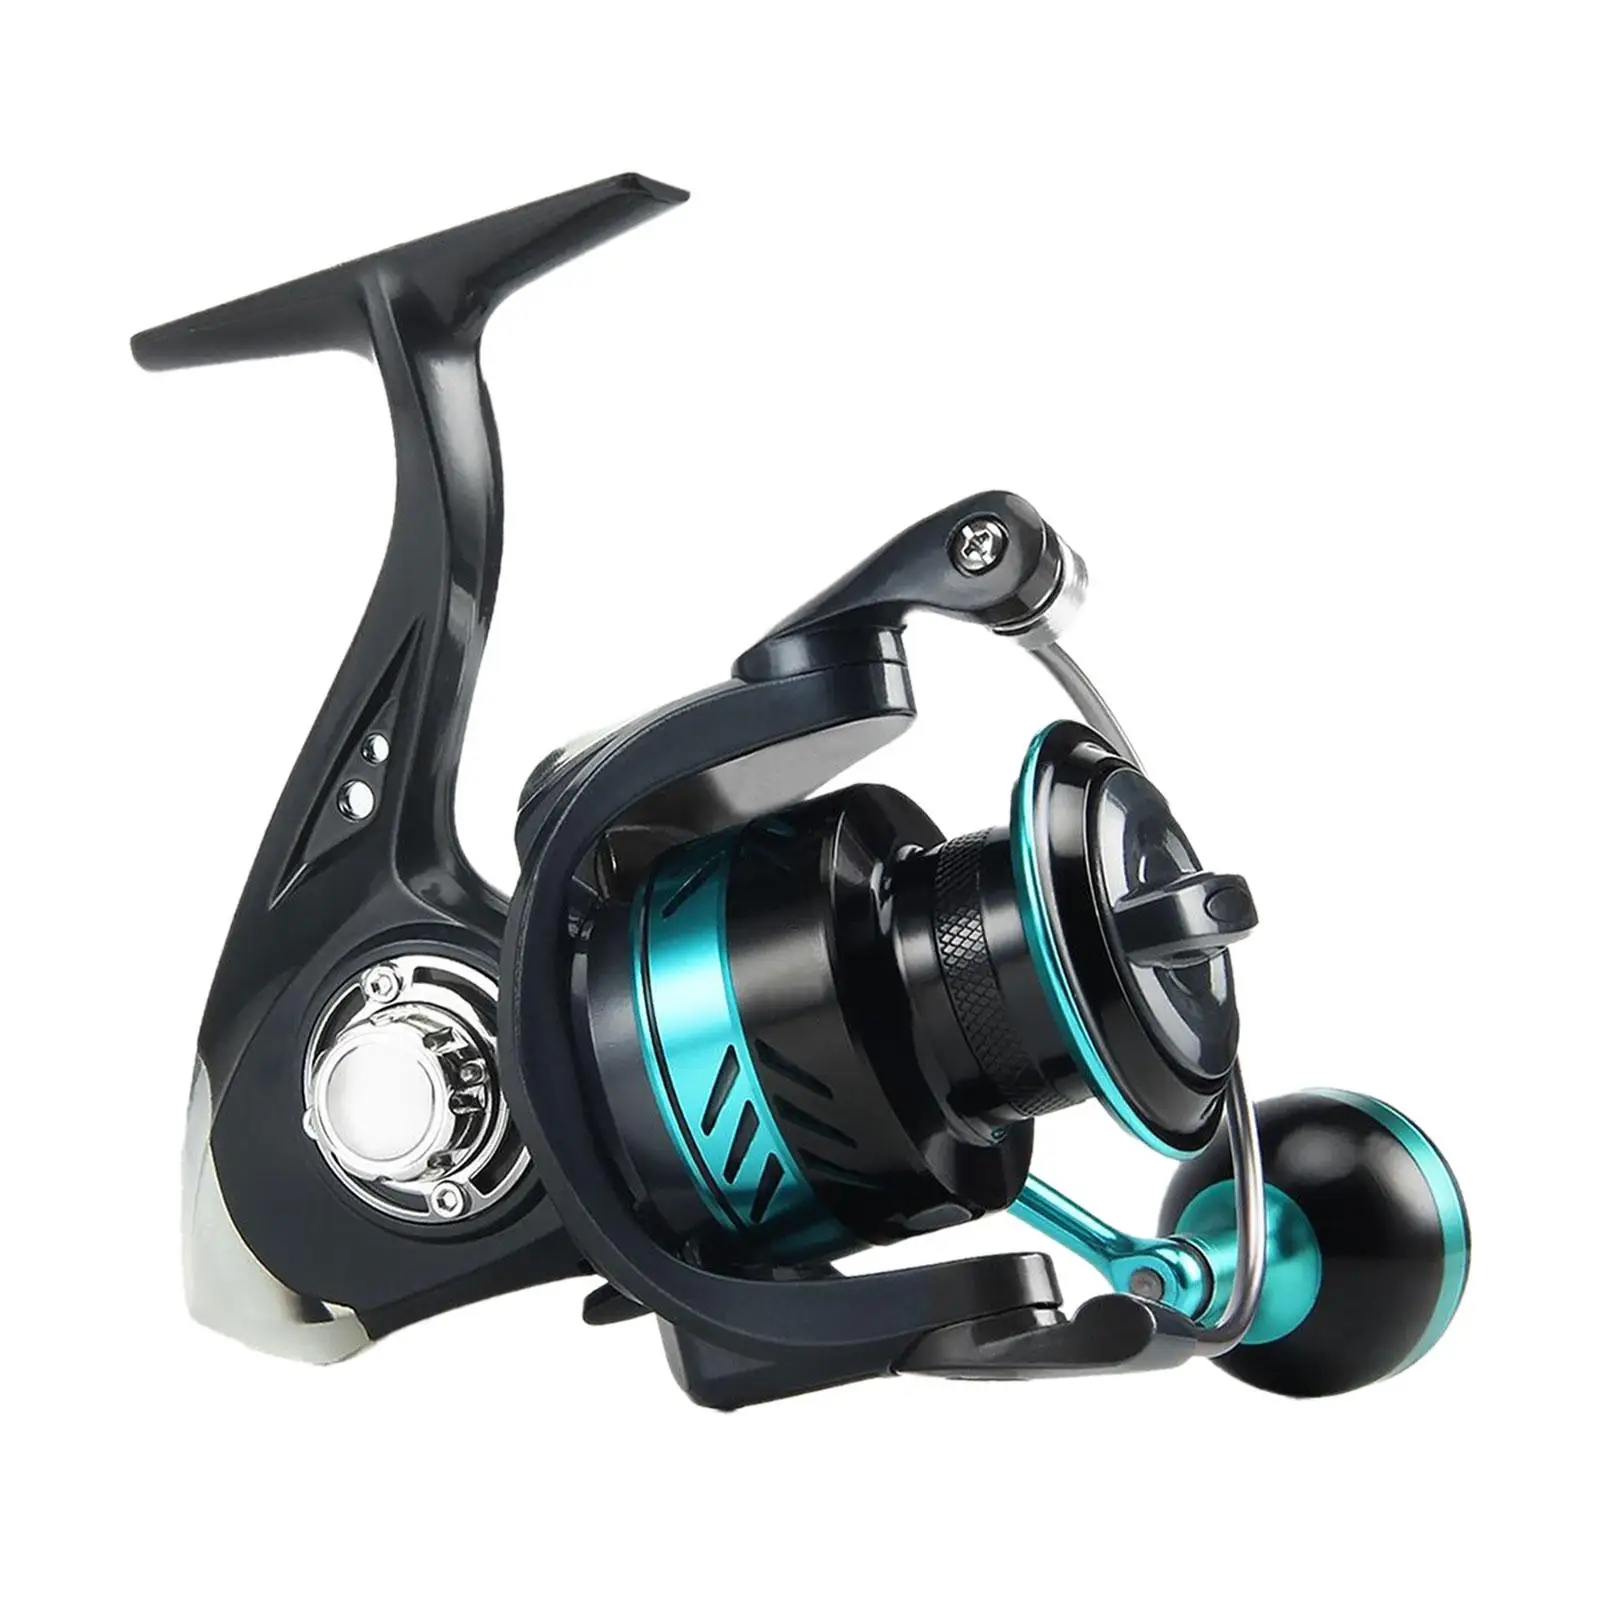 Baitcaster Fishing Reel 5.2:1 Gear Ratio Easy to Use High Speed 16kg Max Drag